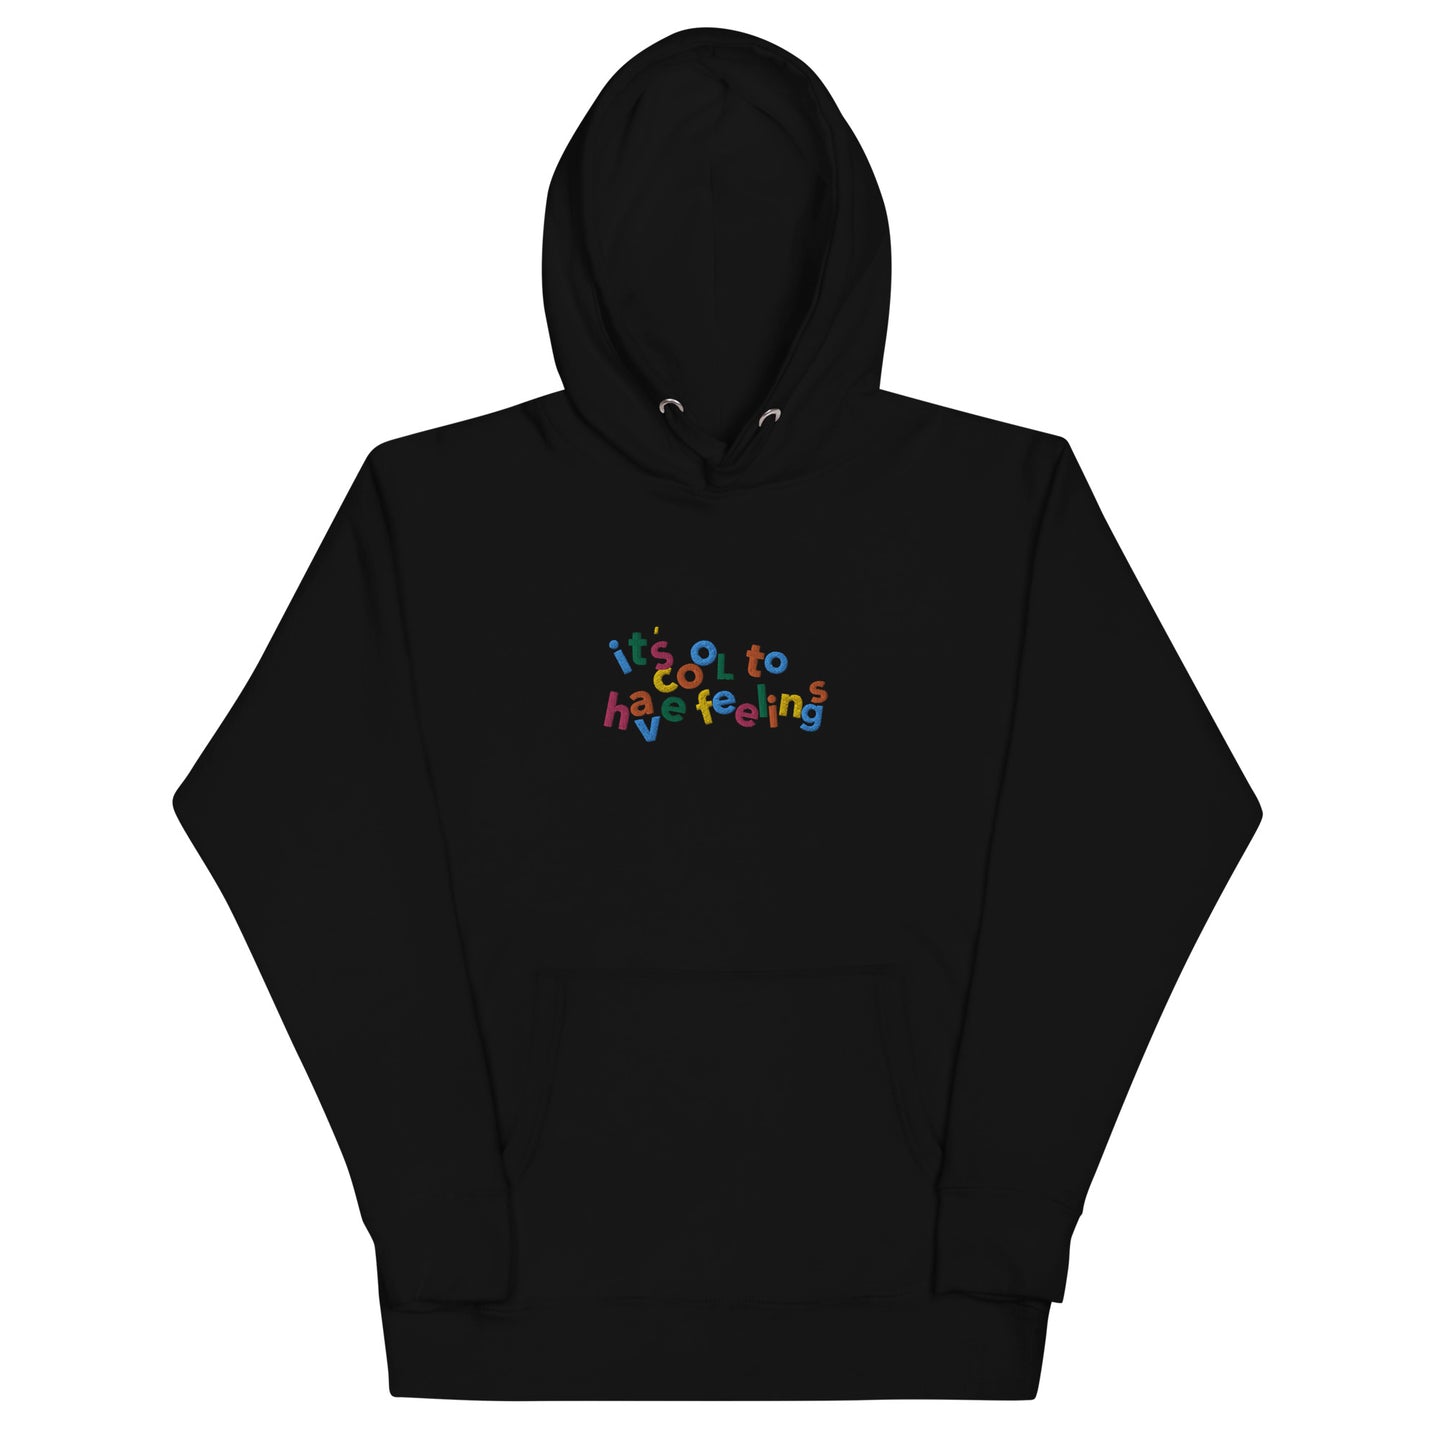 It's Cool To Have Feelings Embroidered Unisex Hoodie